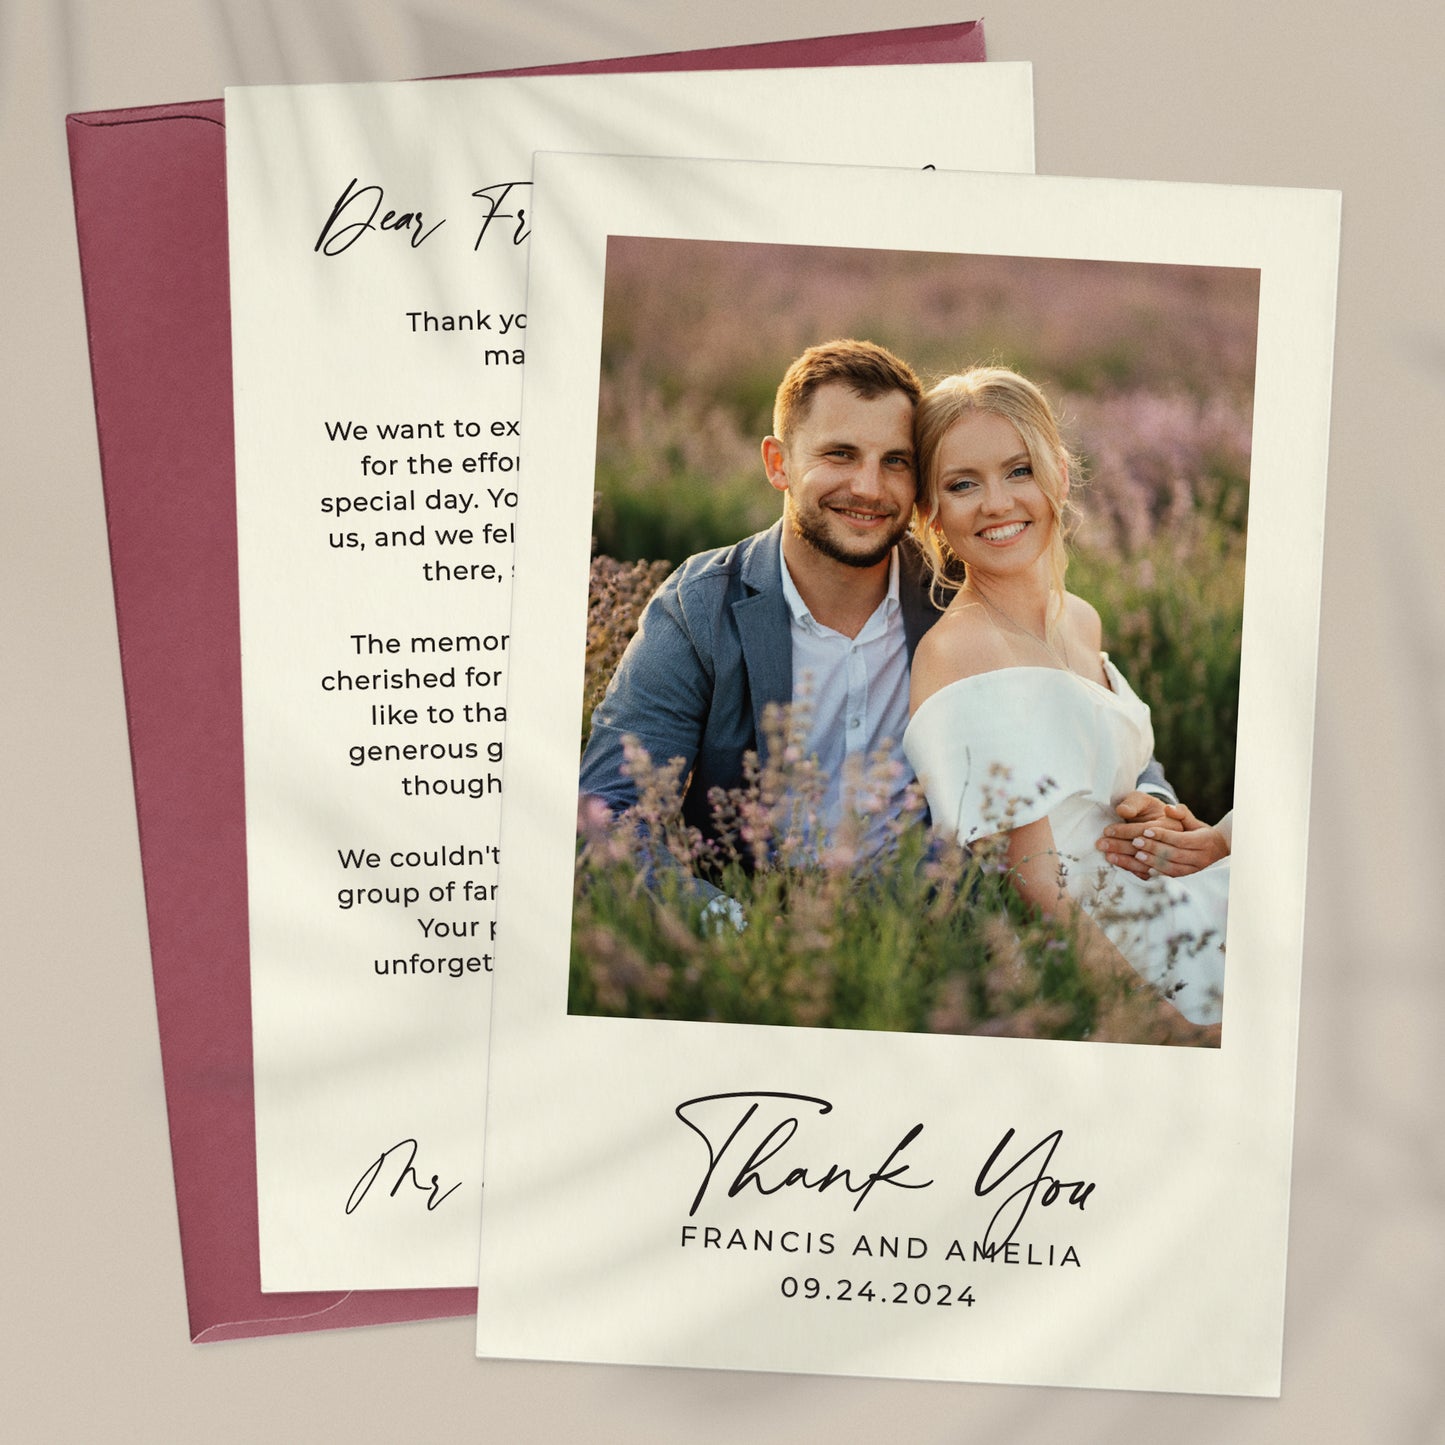 personalized wedding thank you note card with custom photo, names and wedding date featuring a modern calligraphy font - XOXOKristen